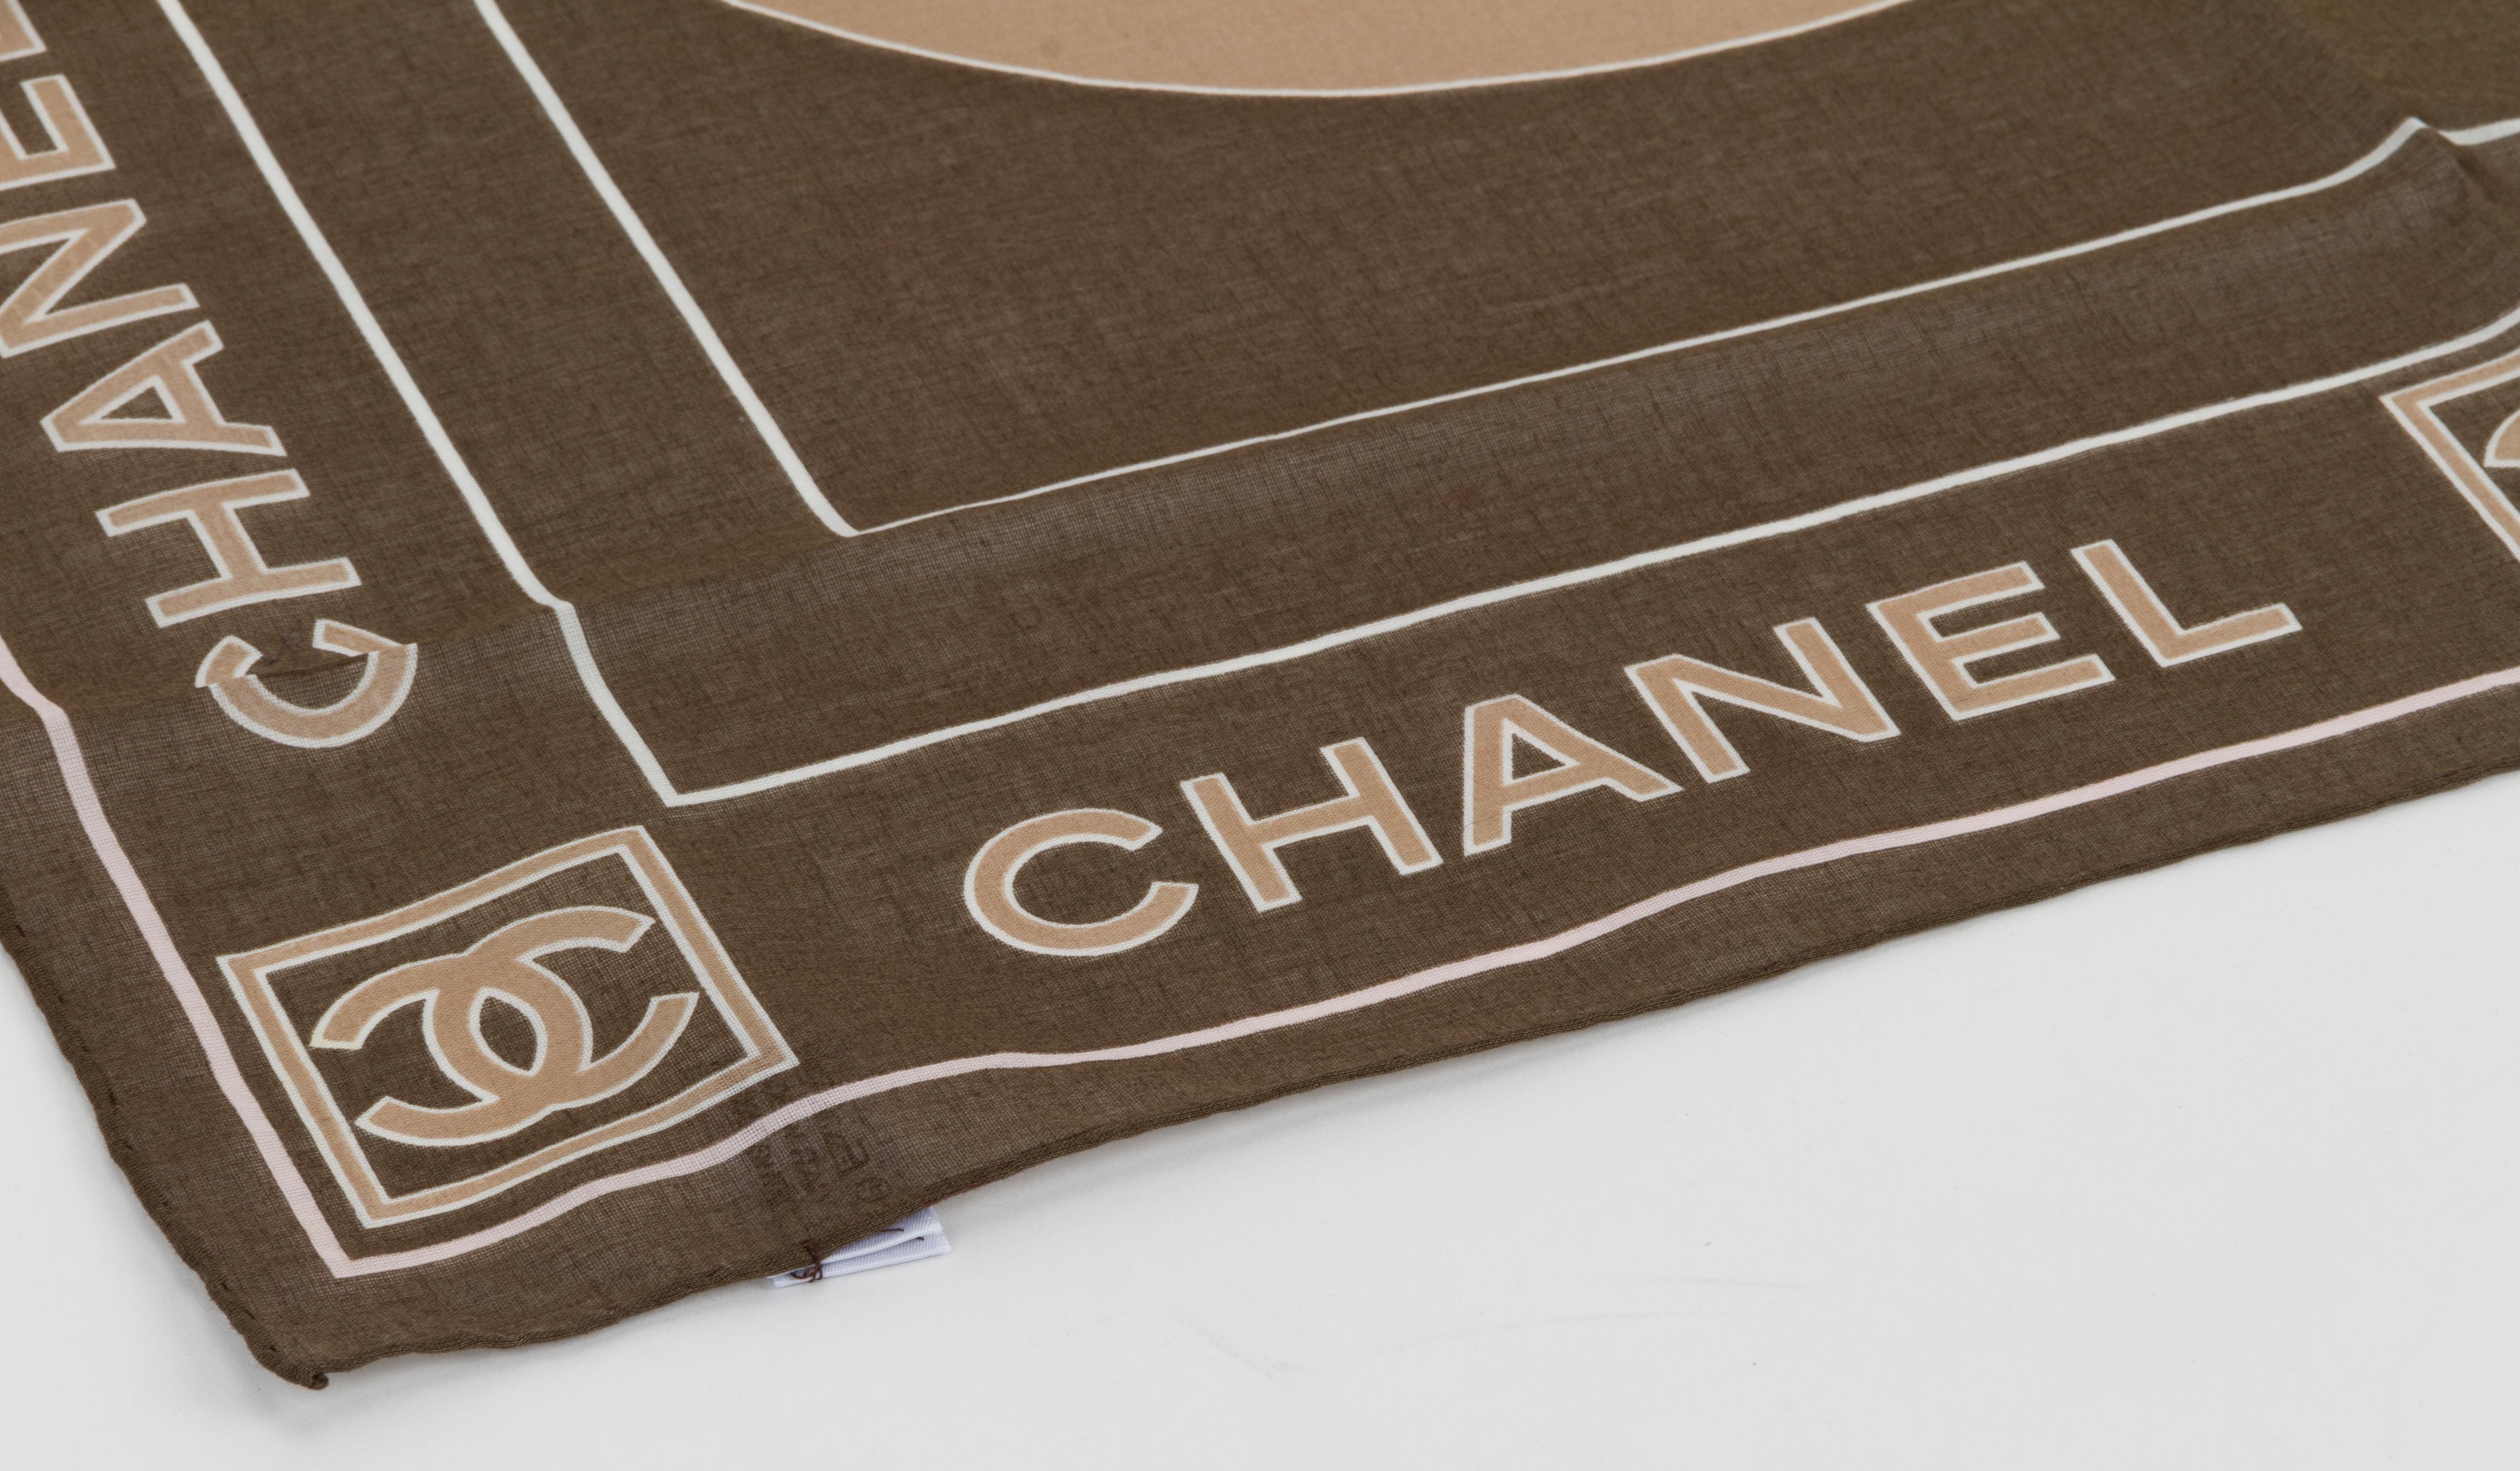 chanel brown scarf